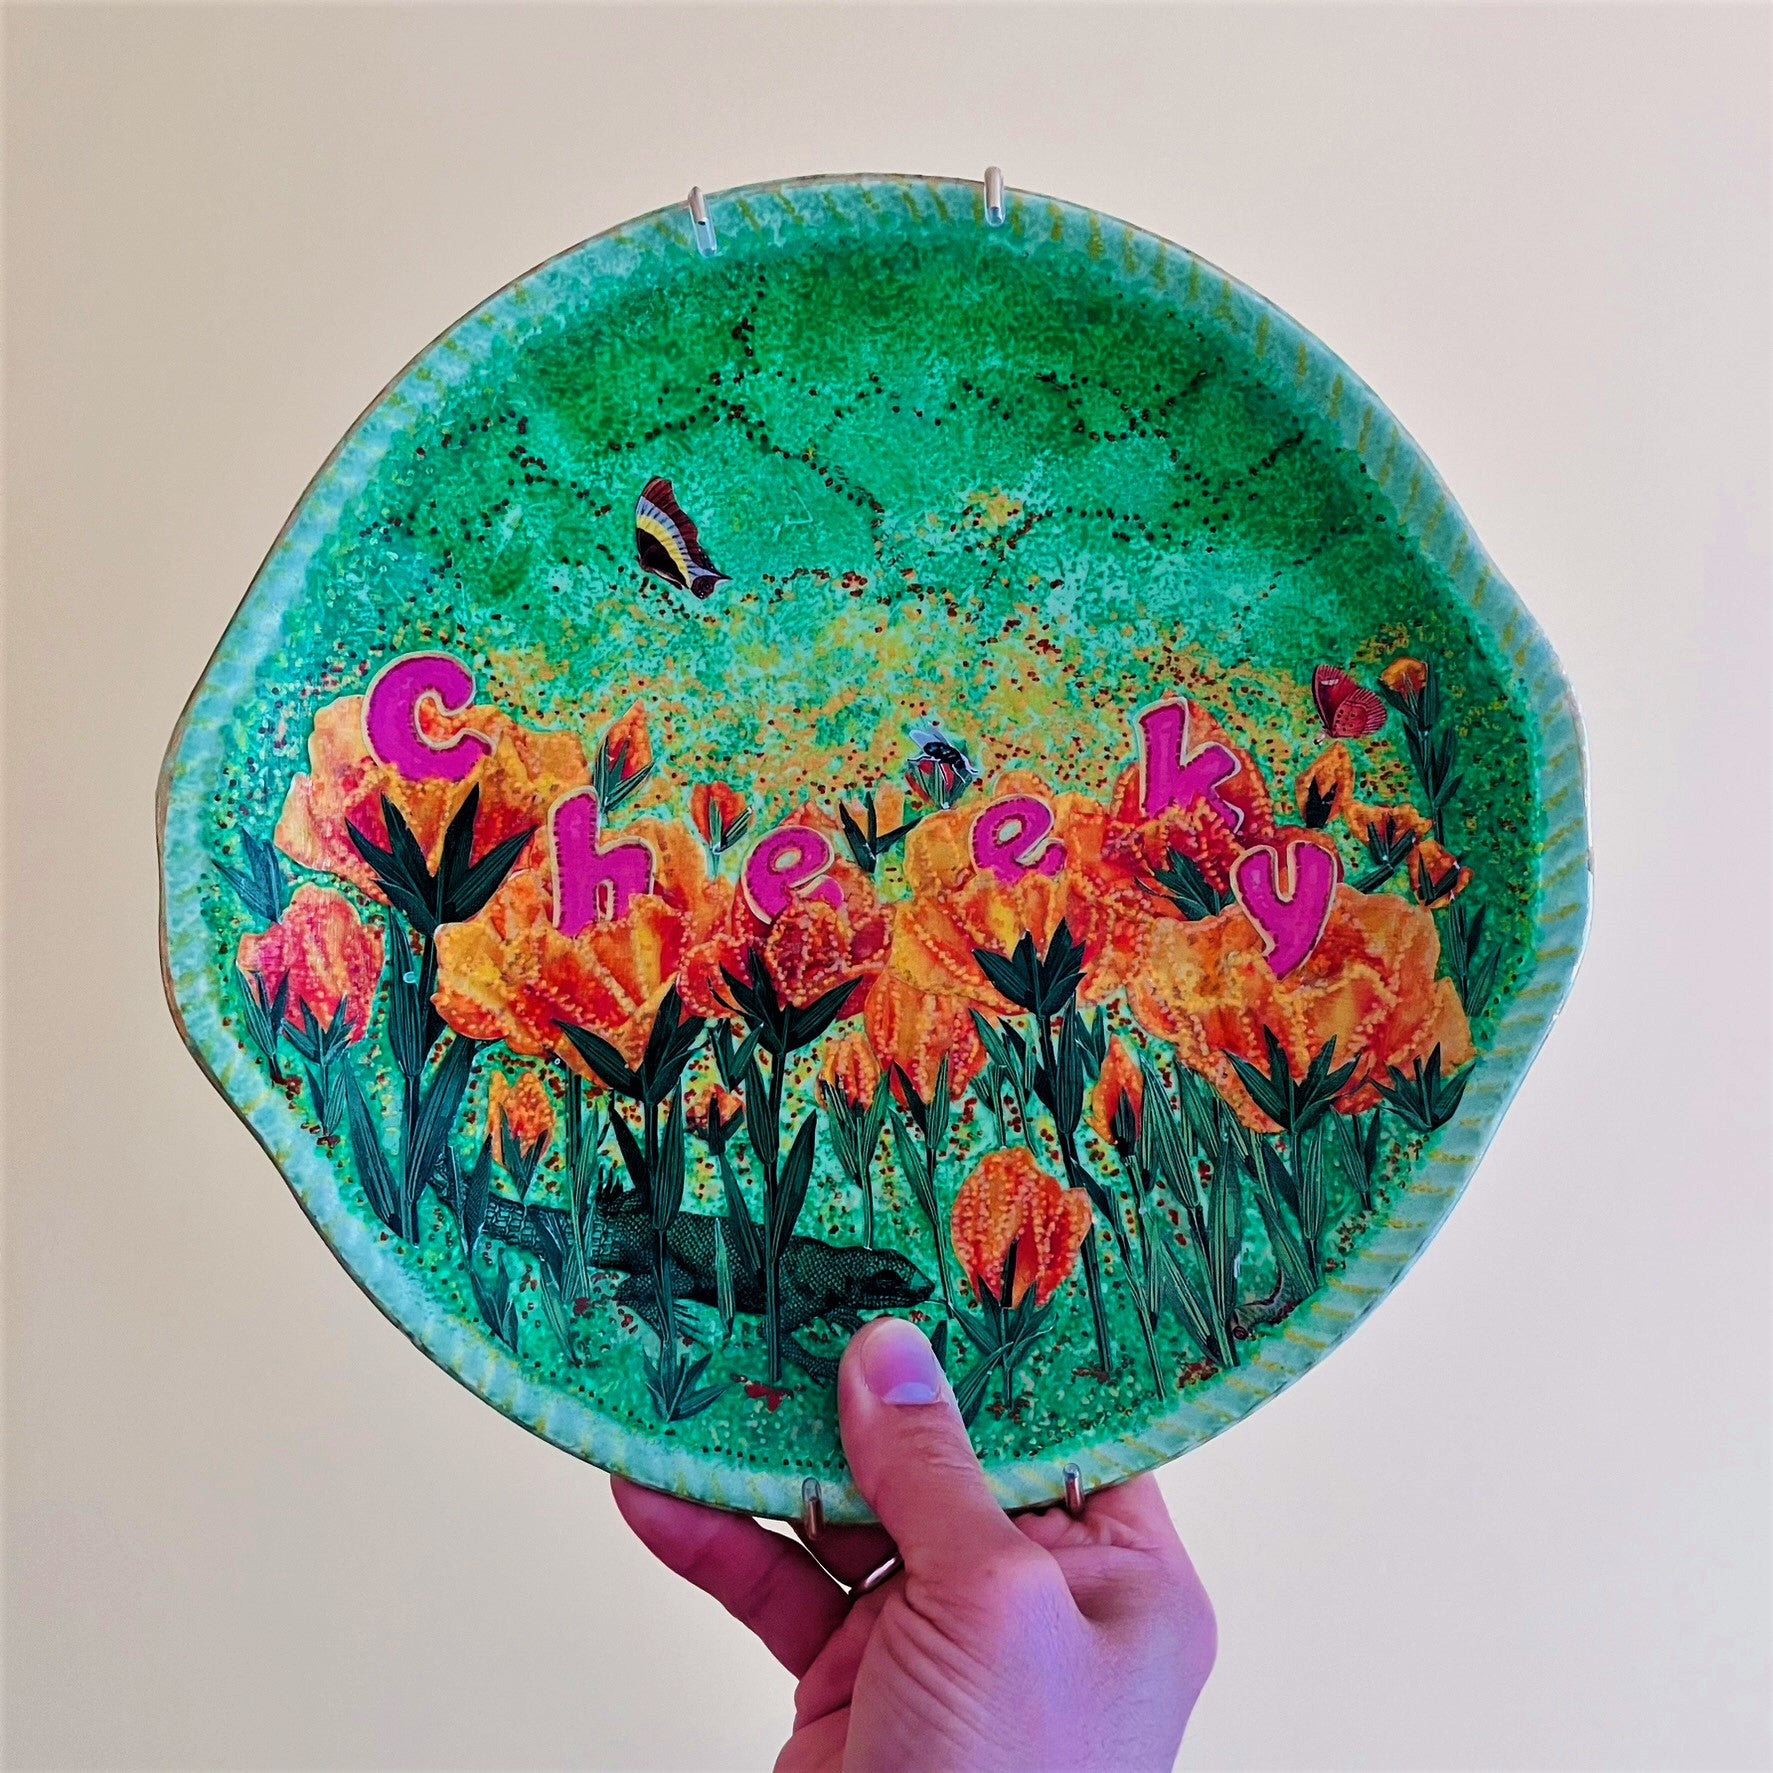 "Cheeky" Wall Plate by House of Frisson, featuring a collage with letters coming out of flowers forming the word "cheeky", and a lizard, on a green background. Holding plate.